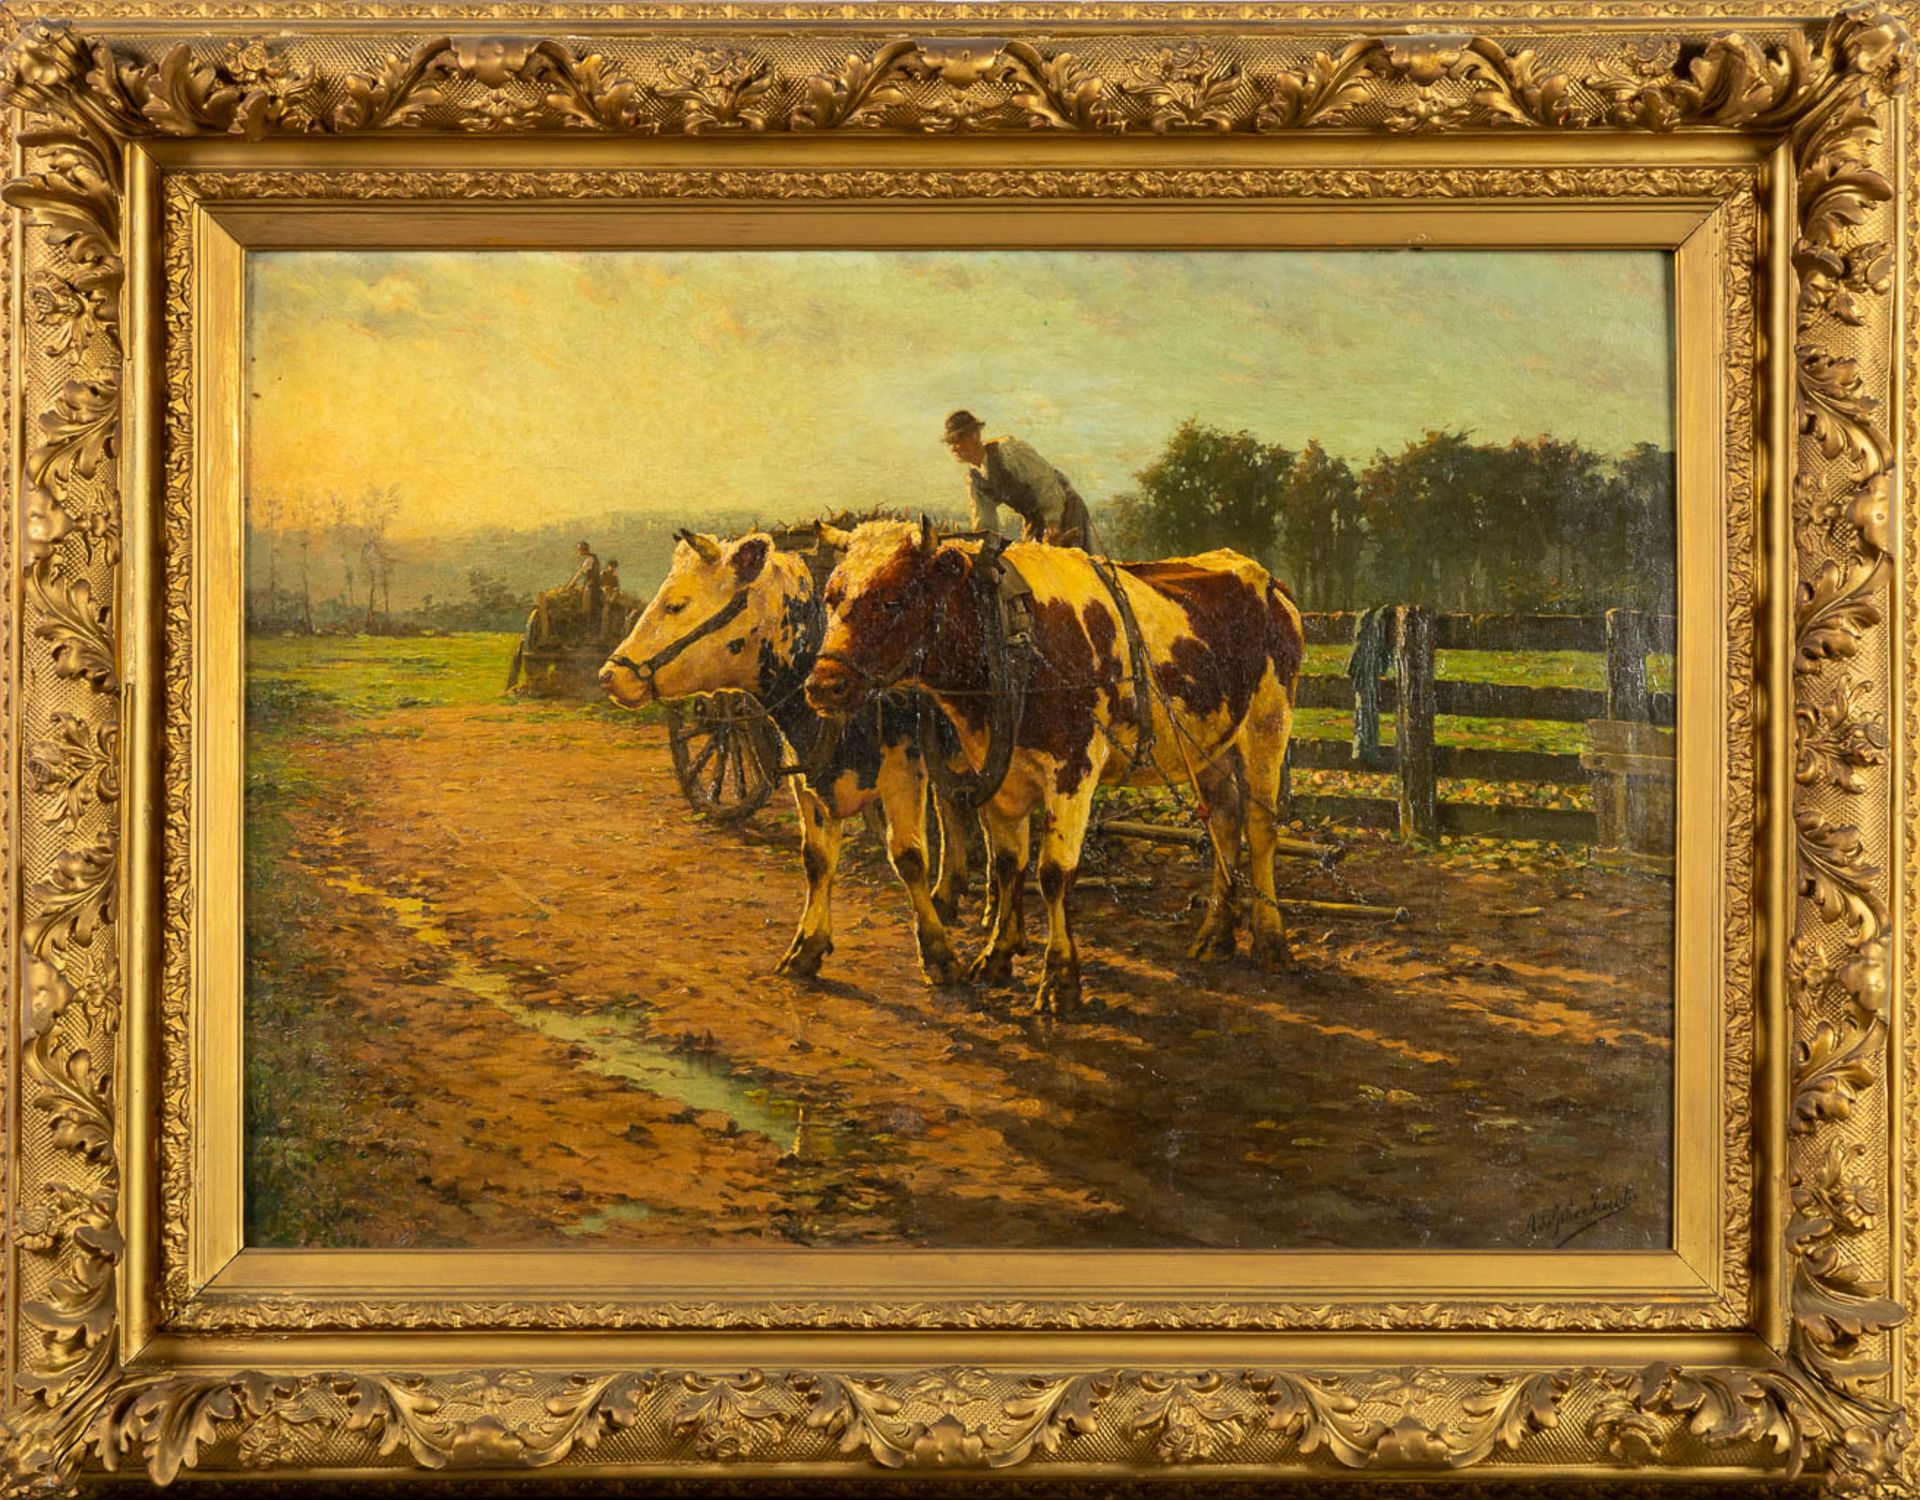 Adolphe JACOBS (1859-1940) 'Cattle hauling a cart' oil on canvas. (W:92 x H:71 cm) - Image 3 of 9